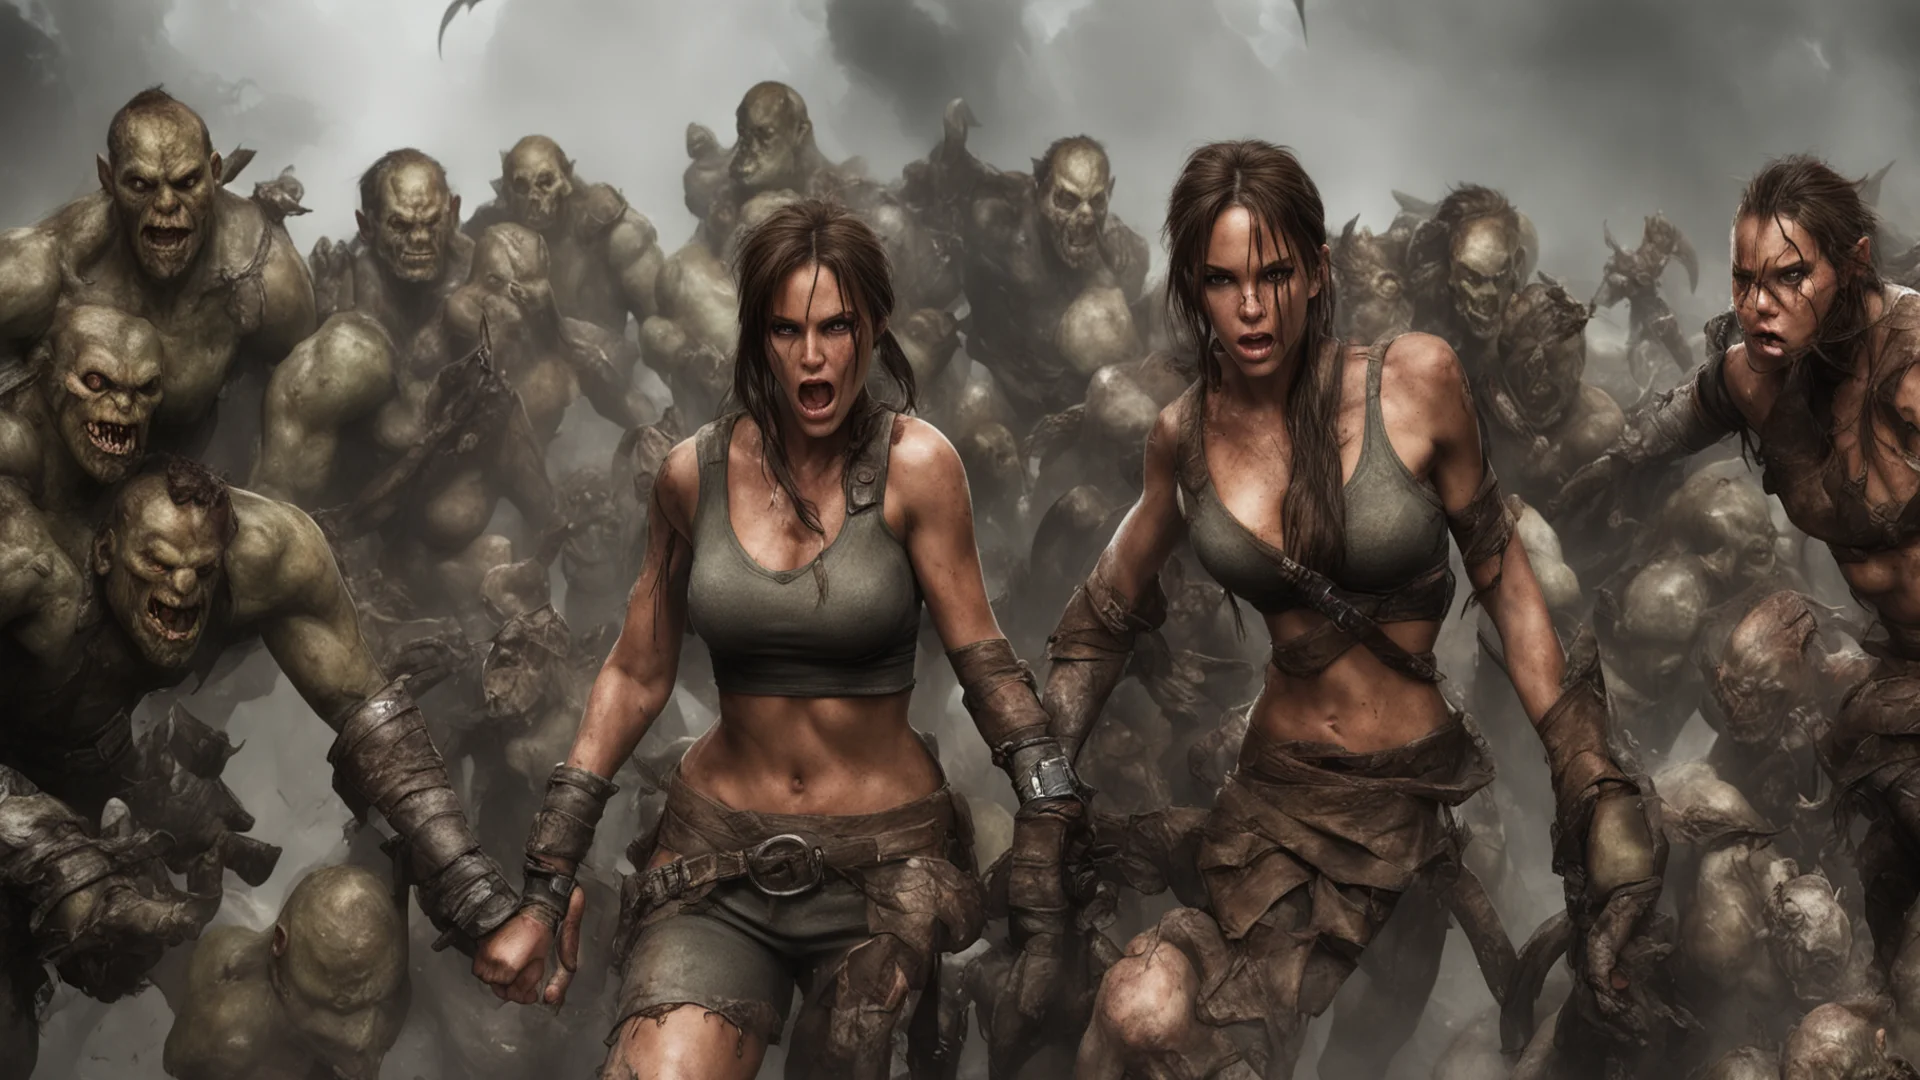 fallen lara croft surrounded by angry orcs wide